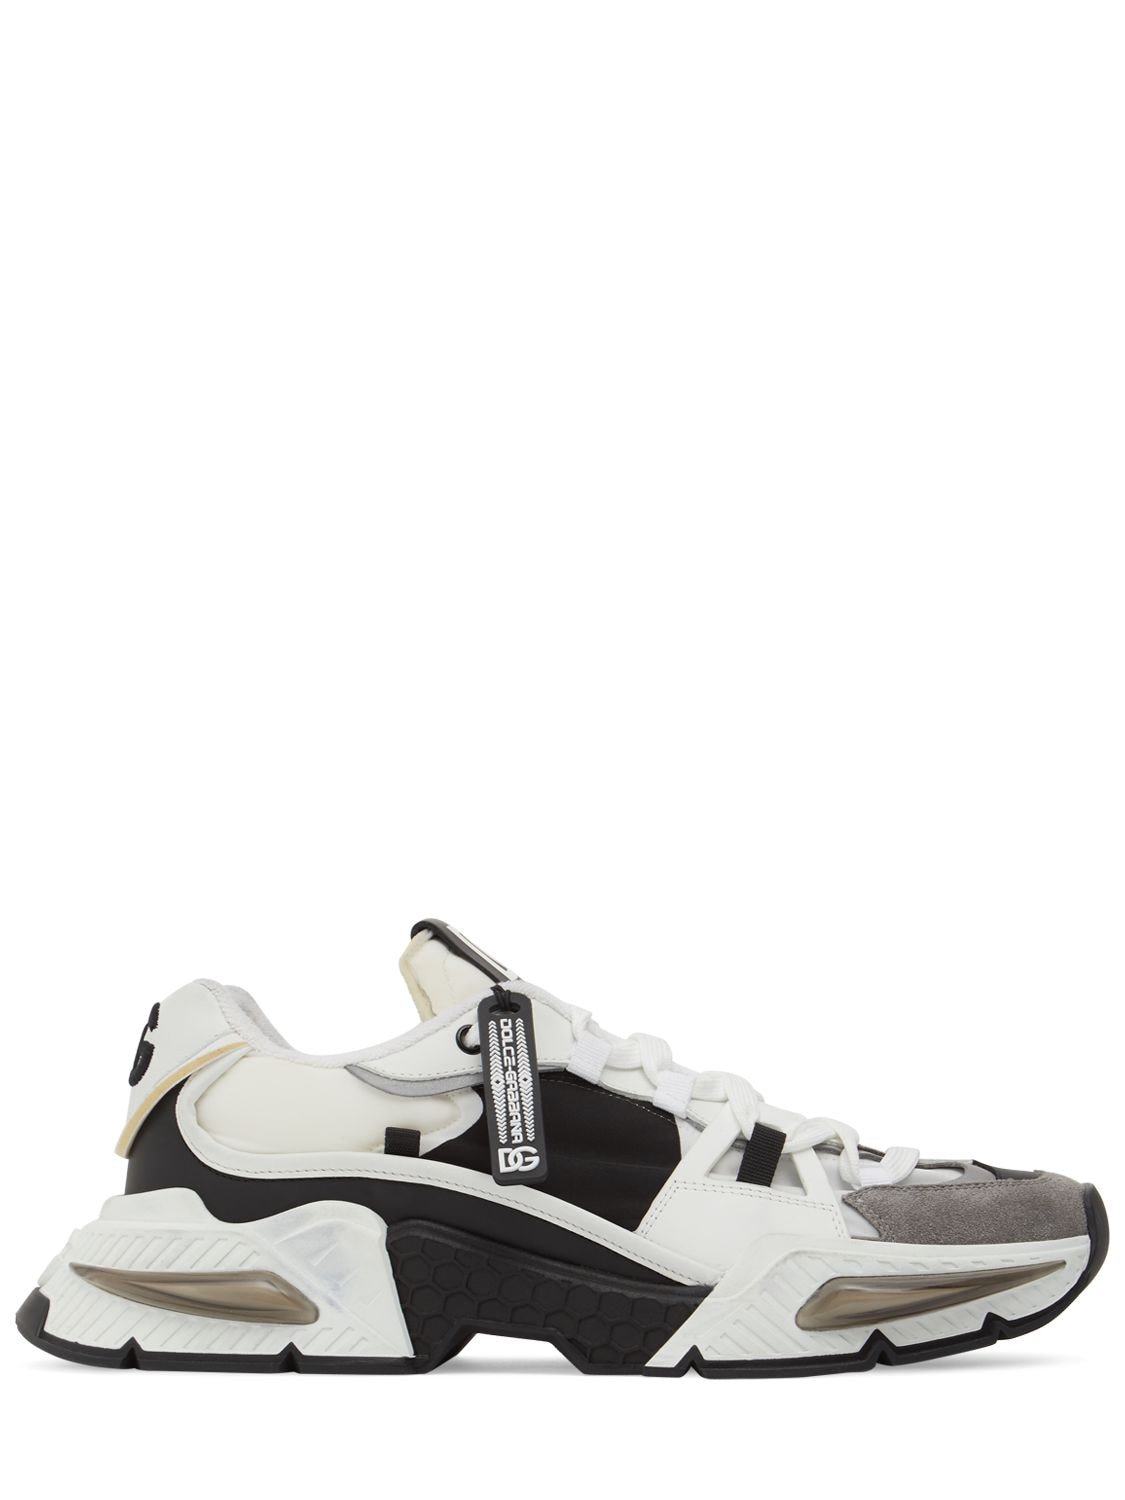 Dolce & Gabbana Air Master Tech Low Top Sneakers In White,grey,black